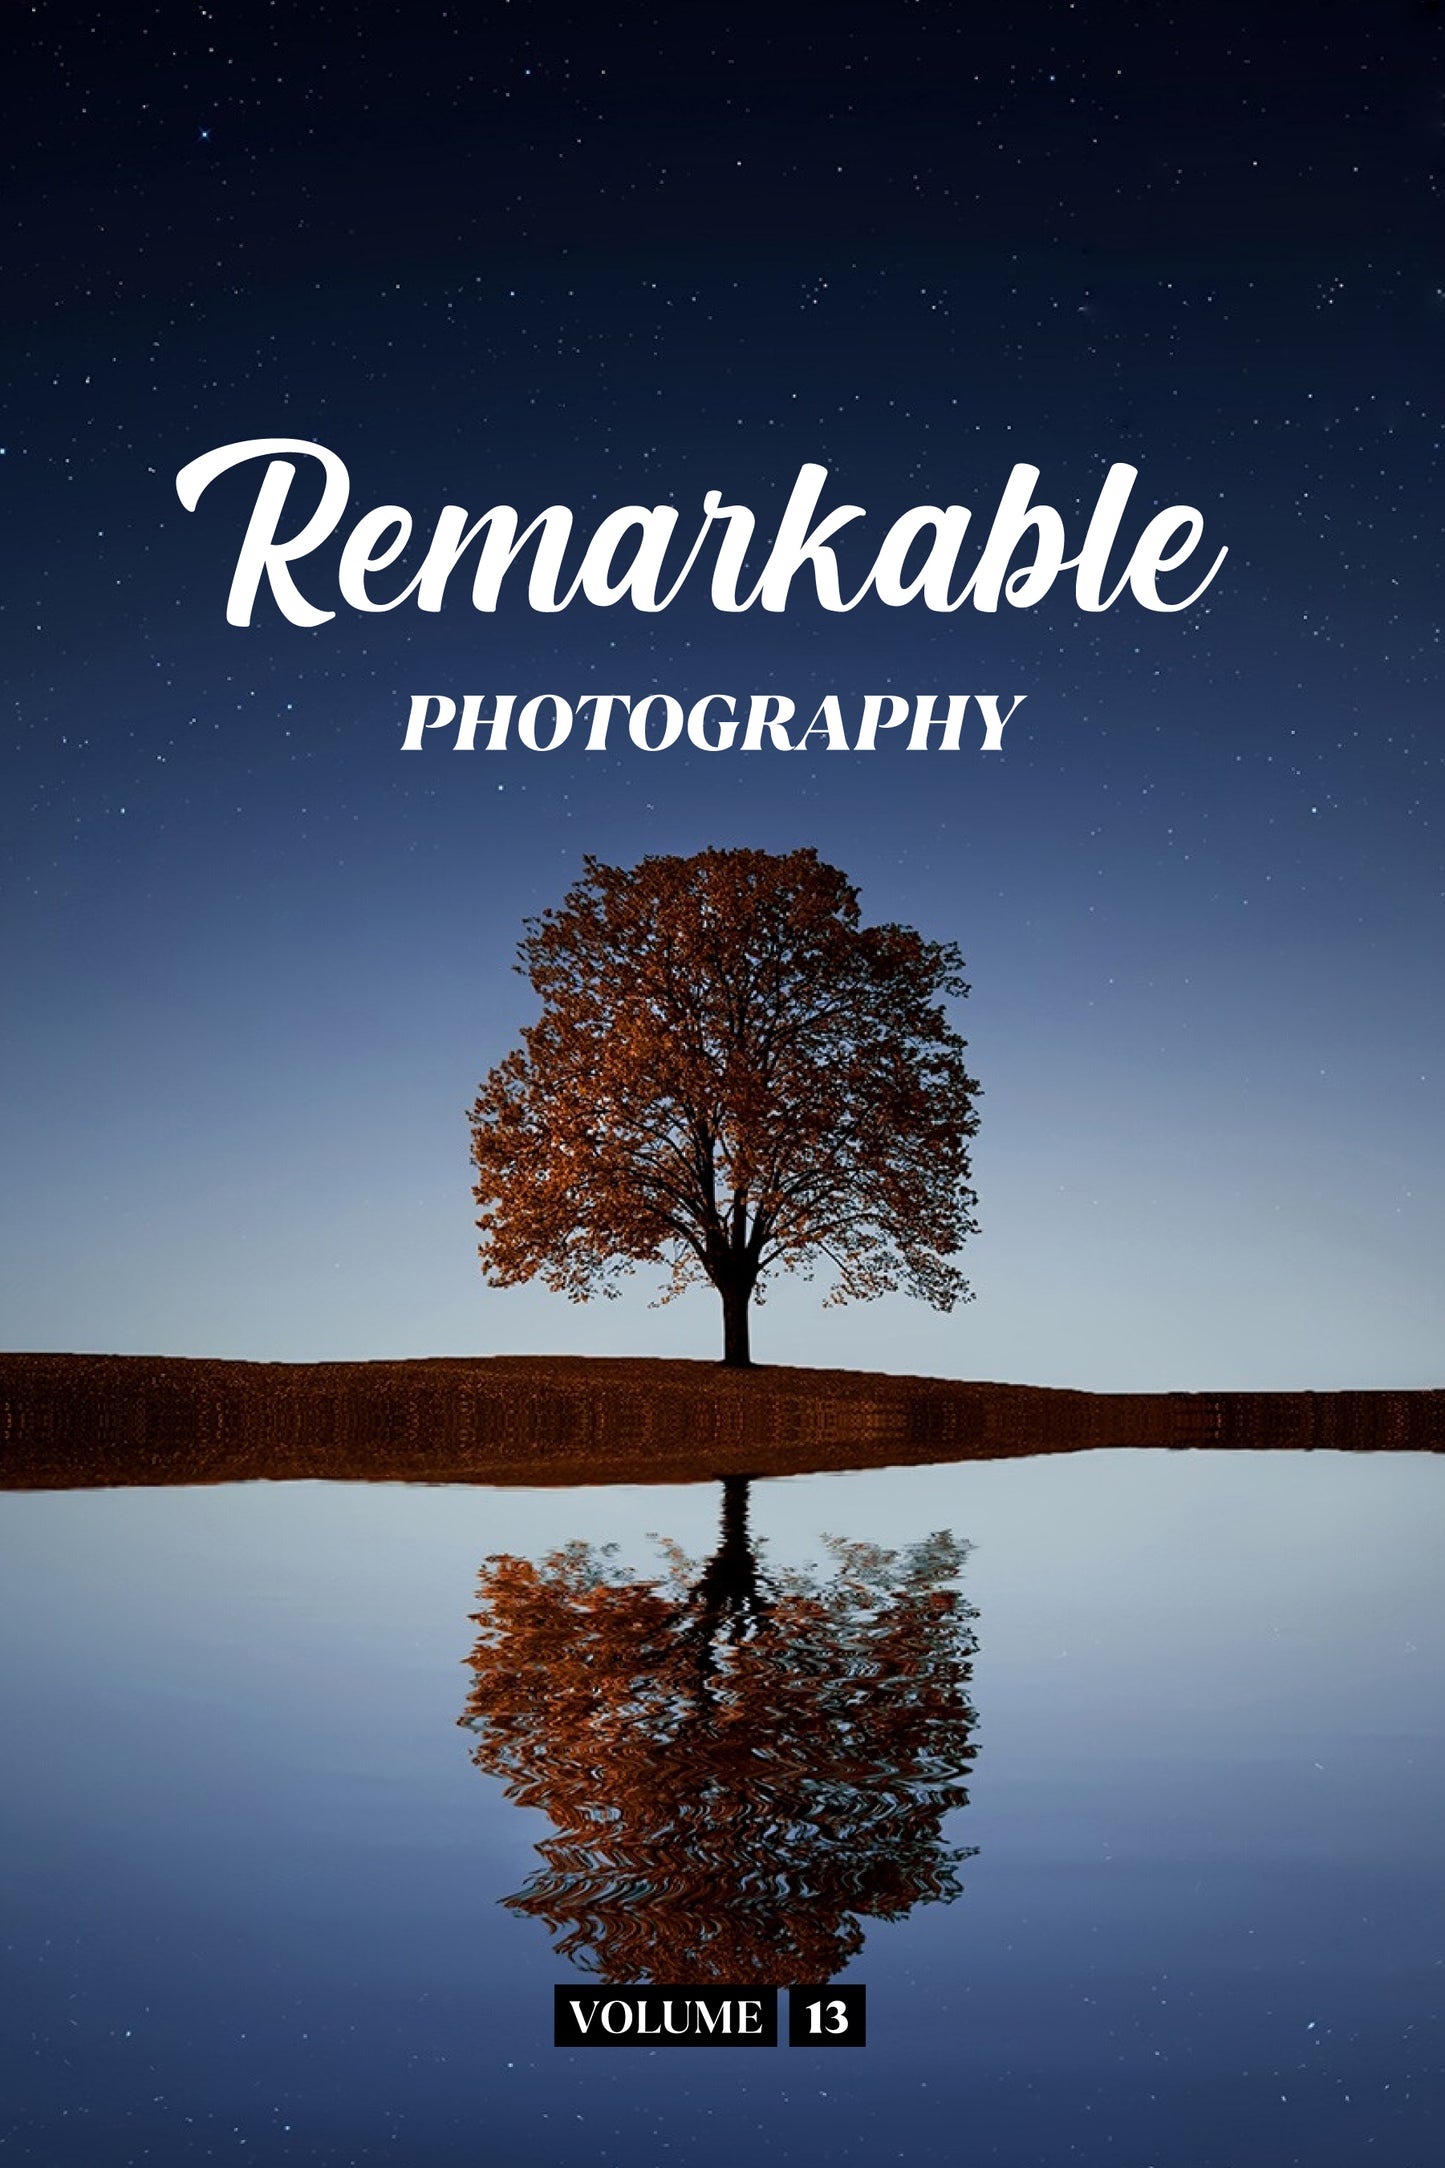 Remarkable Photography Volume 13 (Physical Book)